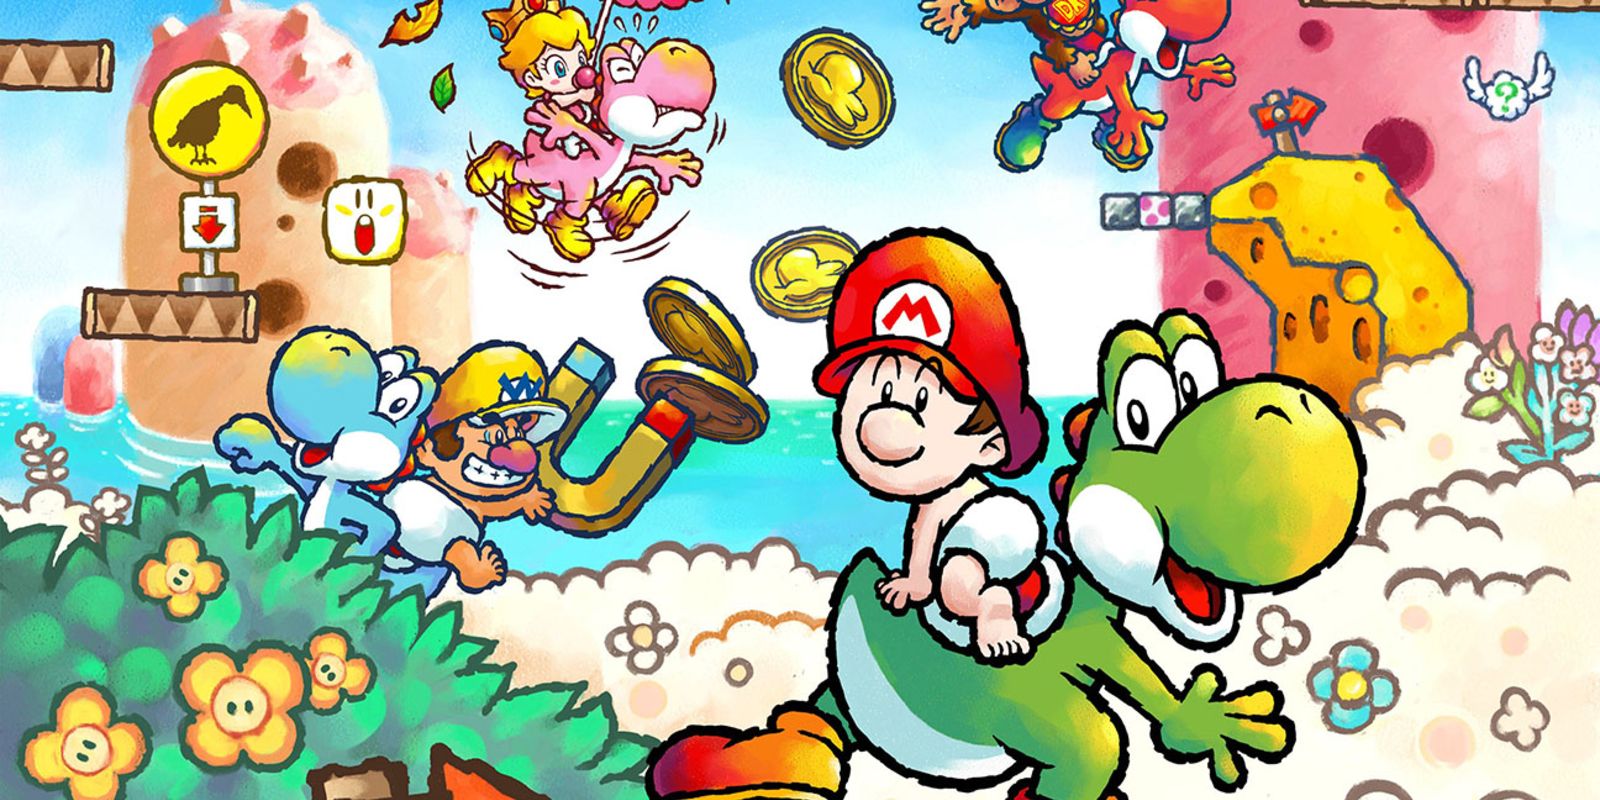 Yoshis carrying the babies in promotional art for Yoshi's Island DS